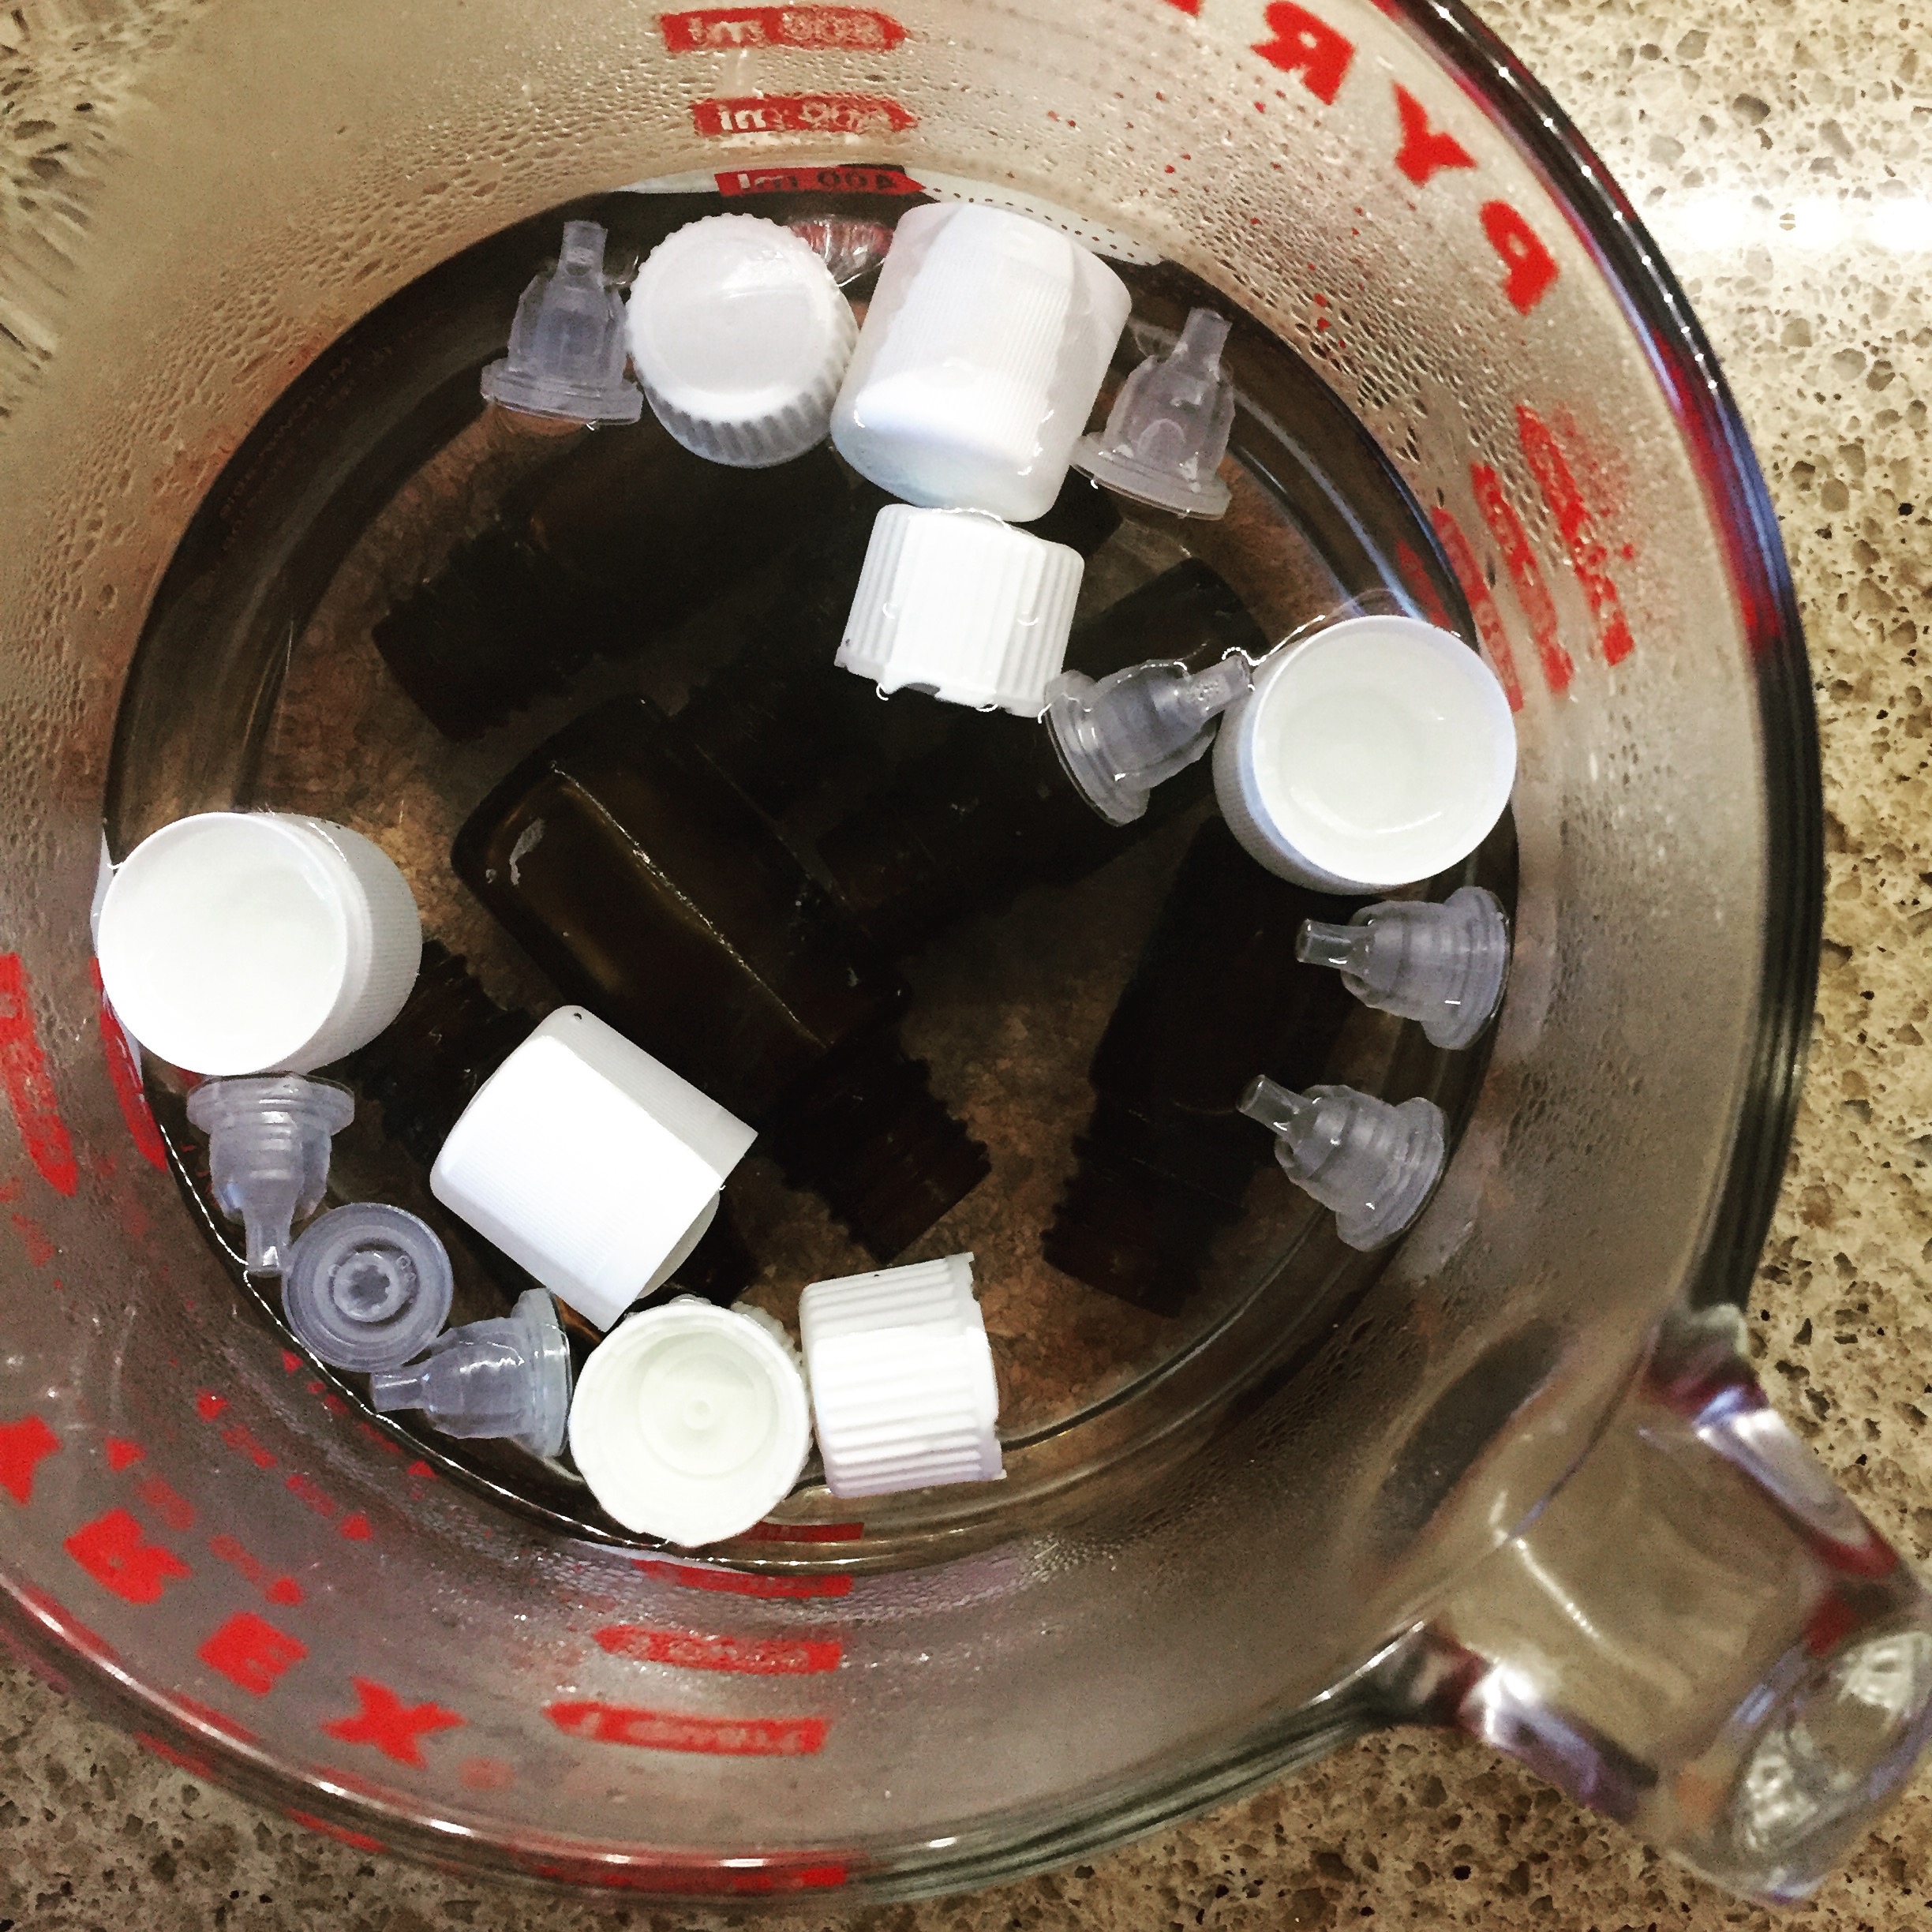 Living With Essential Oils: How to Clean Your Empty Bottles ~ DIY Blog post by Bubblegum Sass 